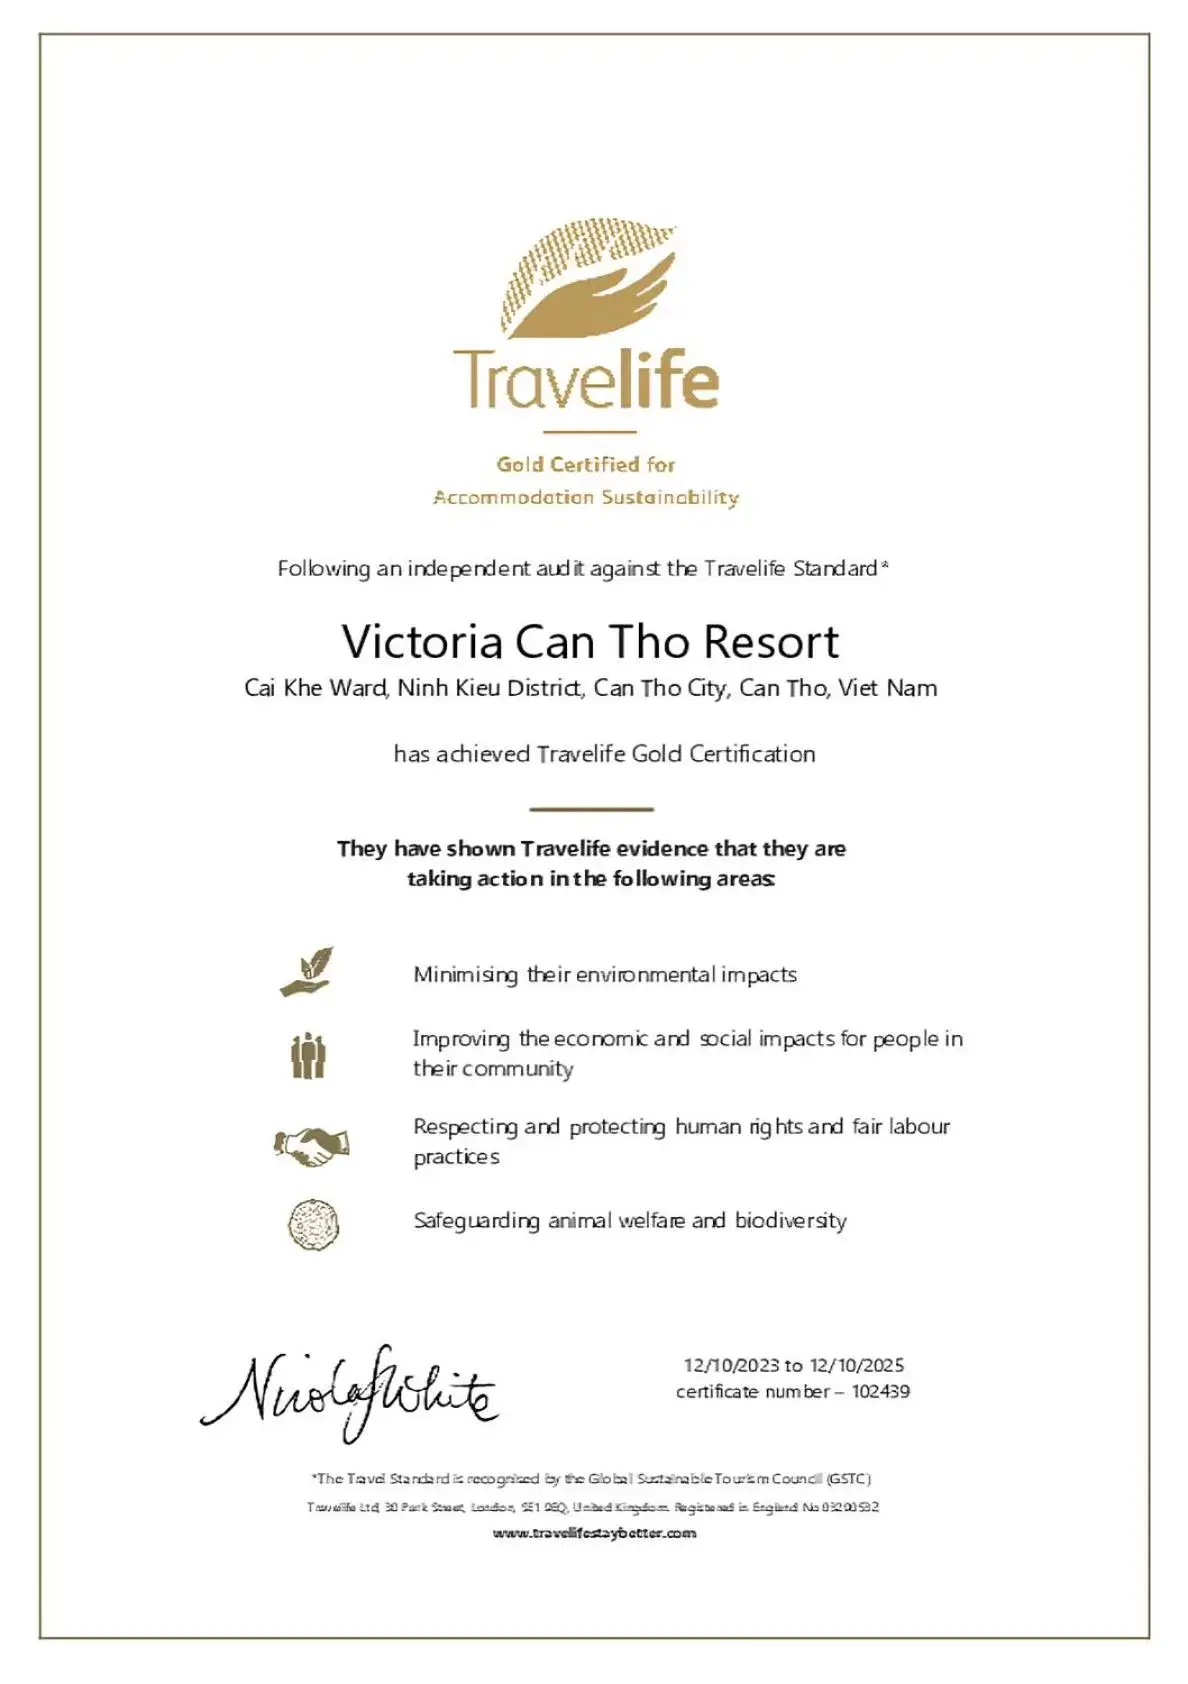 Certificate/Award in Victoria Can Tho Resort